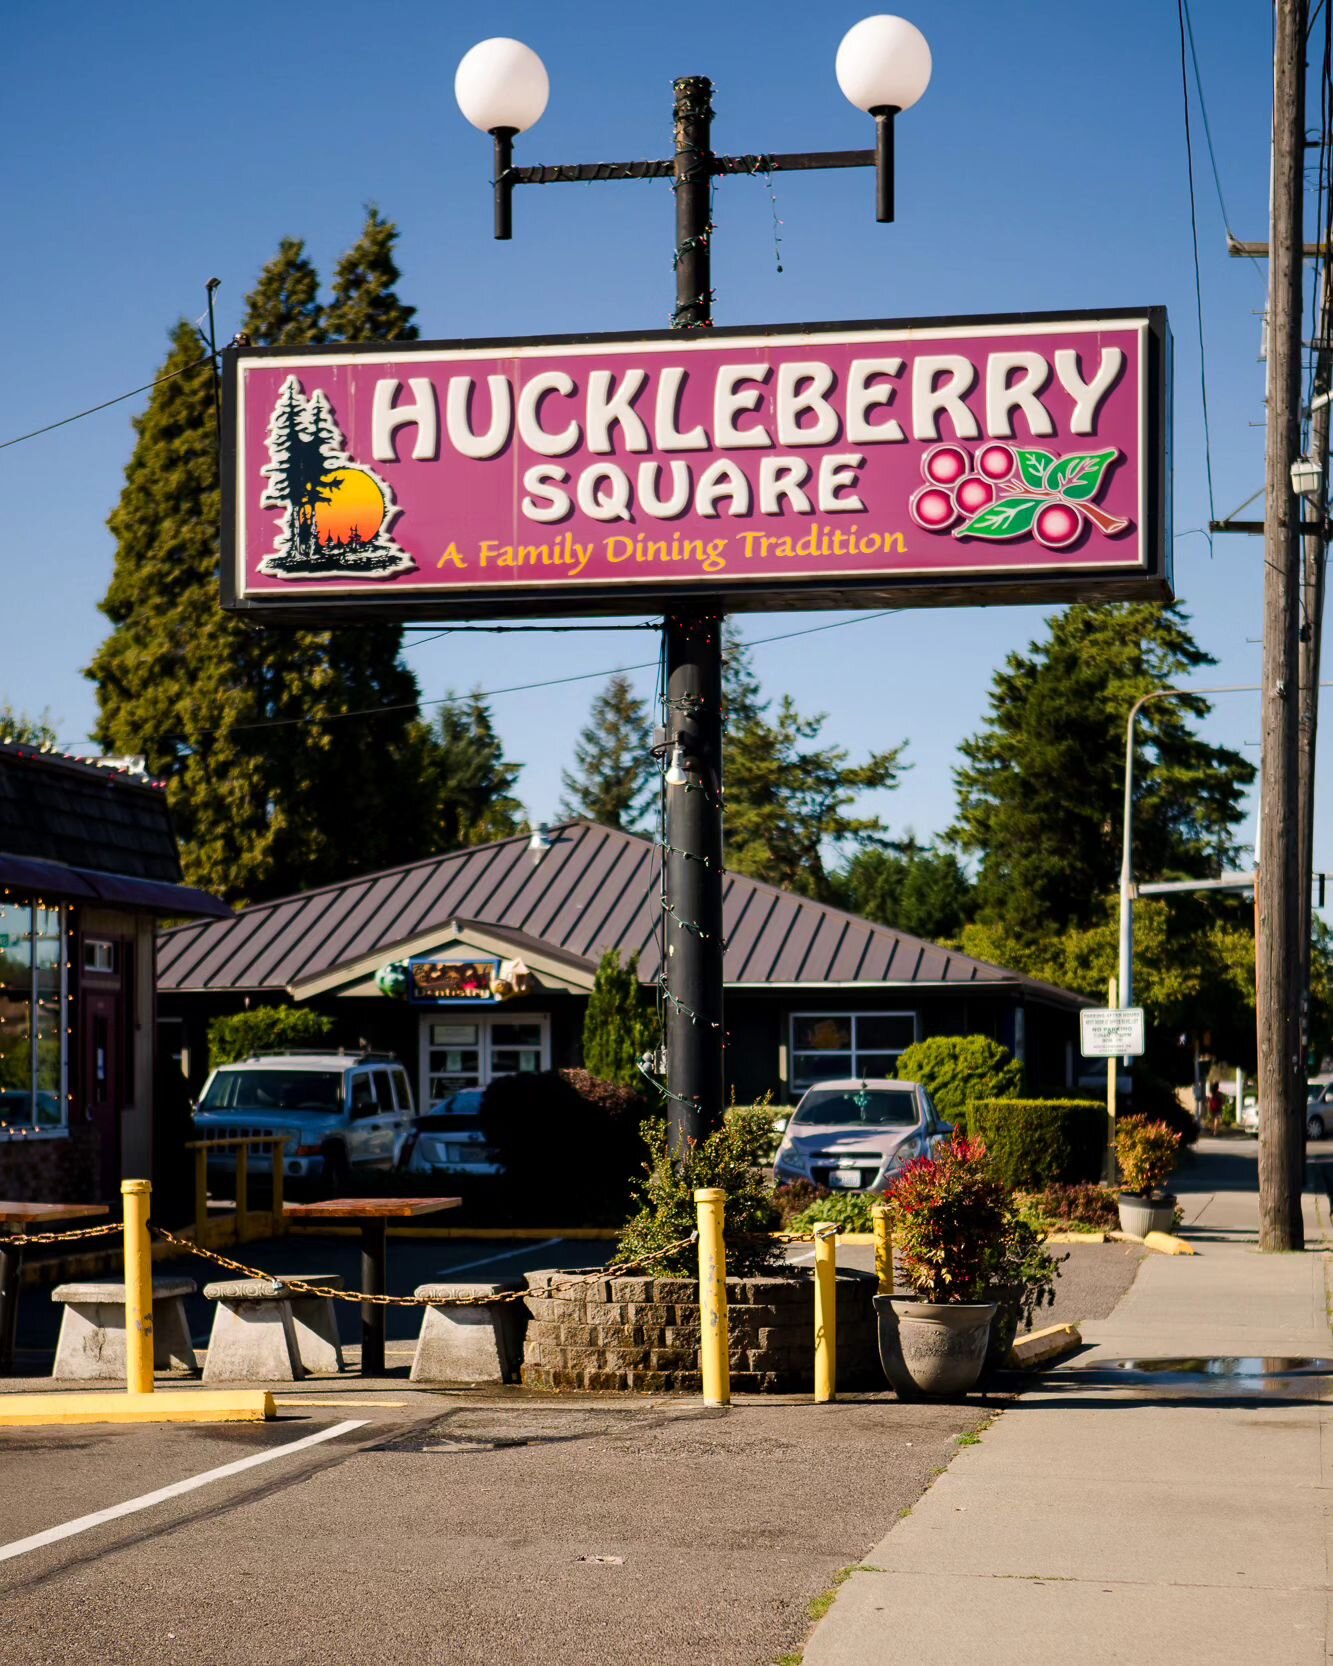 This warm sunny afternoon is your sign to step outside, go for a nice stroll and make your way straight to Huckleberry Square! 😉

We're located in the heart of Burien, WA. and our huge sign should help you find us with no problems.  See you soon!

#